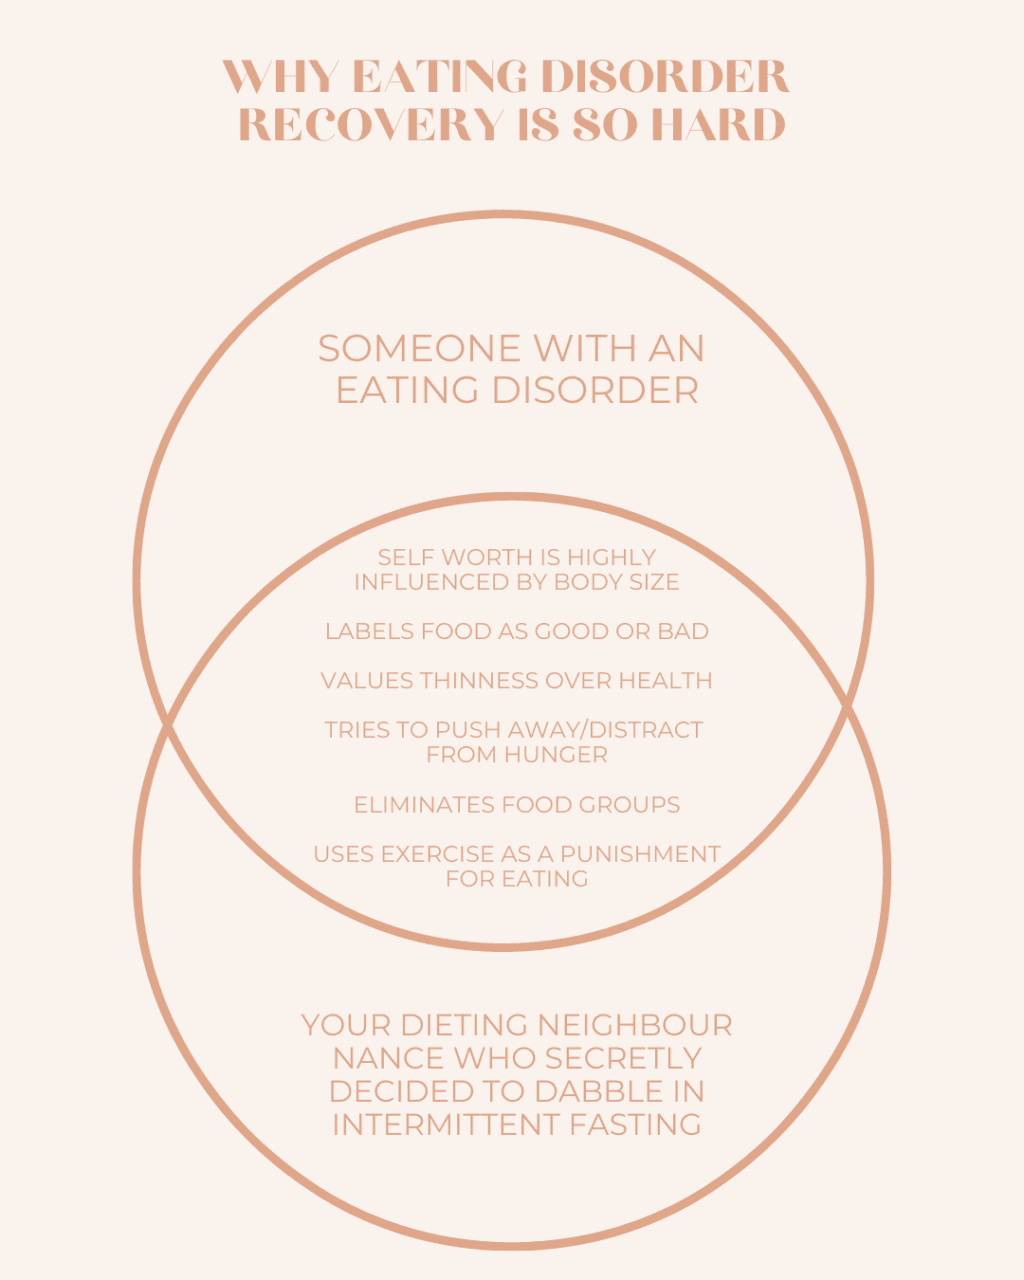 A ven diagram displaying WHY EATING DISORDER  RECOVERY IS SO HARD with the following text in the first circle "SOMEONE WITH AN  EATING DISORDER" The following text in the middle circle "SELF WORTH IS HIGHLY INFLUENCED BY BODY SIZE  LABELS FOOD AS GOOD OR BAD  VALUES THINNESS OVER HEALTH  TRIES TO PUSH AWAY/DISTrACT  FROM HUNGER  ElIMinATES FOOD GROUPS  USES EXERCISE AS A PUNISHMENT FOR EATING" and the following text in the bottom circle "Your dieting neighbour Nance who secretly decided to dabble in intermittent fasting"